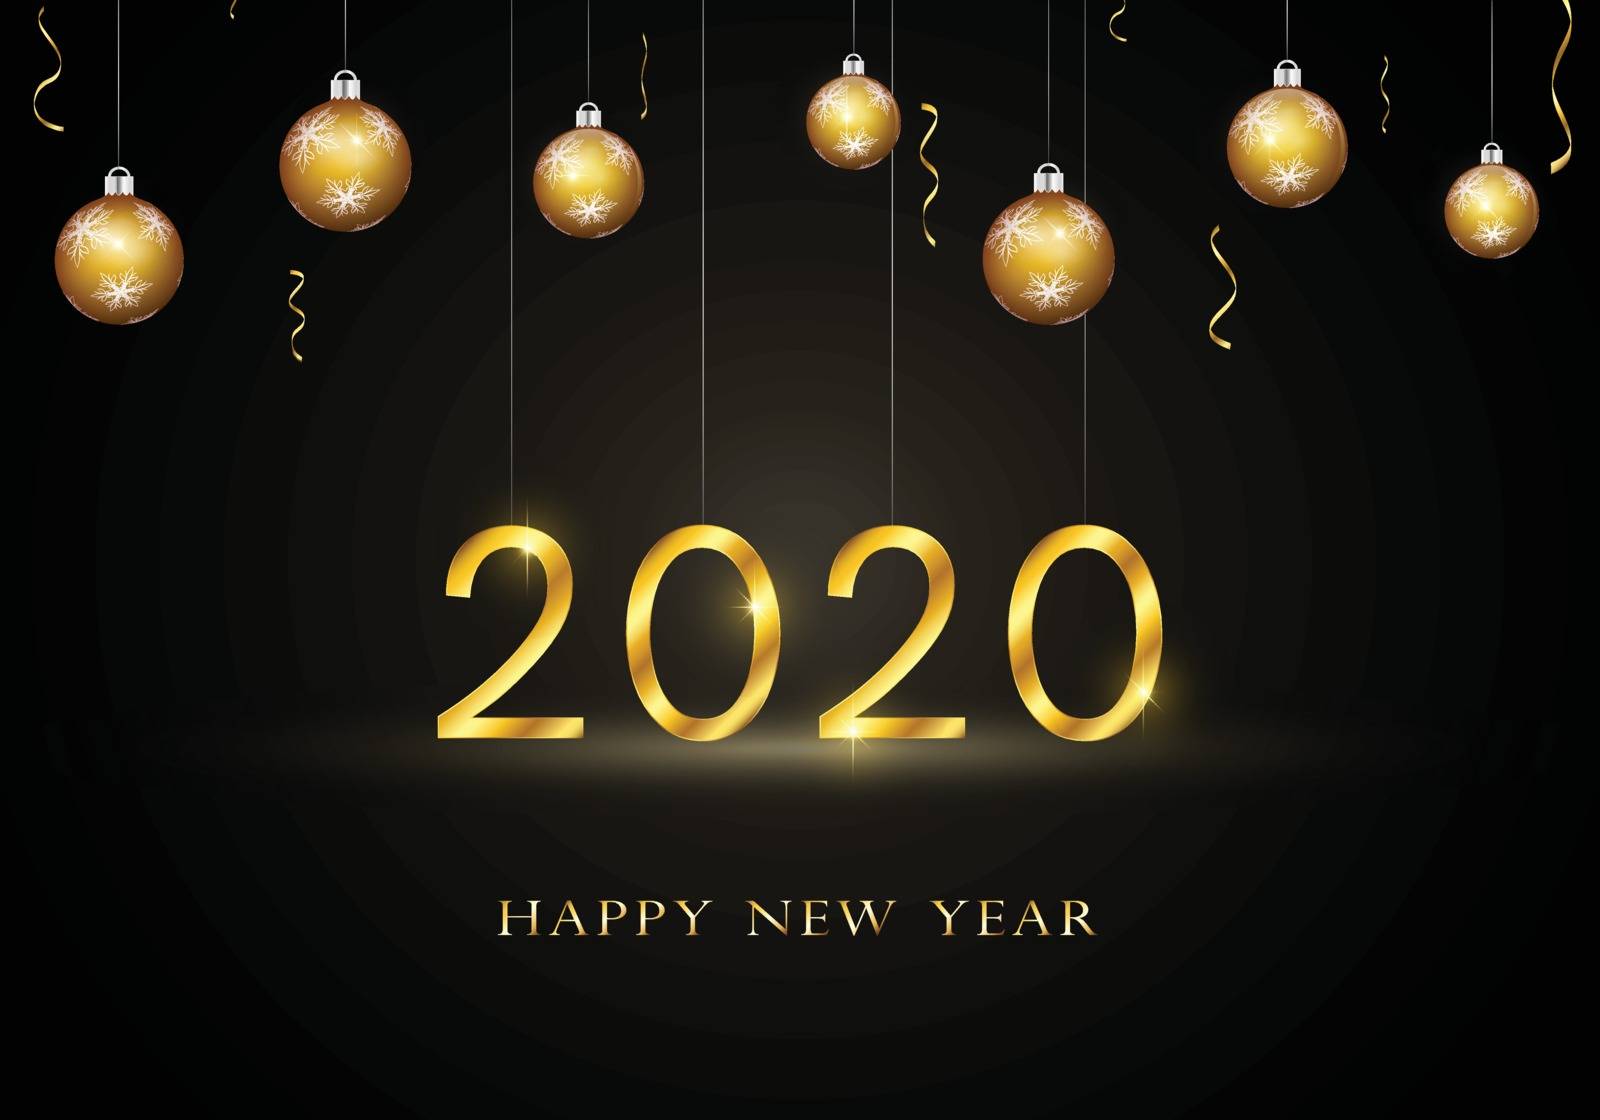 2020 Happy New Year background with gold shiny numbers and letters. Hanging christmas tree ornaments, falling golden confetti. Dark celebration design with lights. 3D illustration.